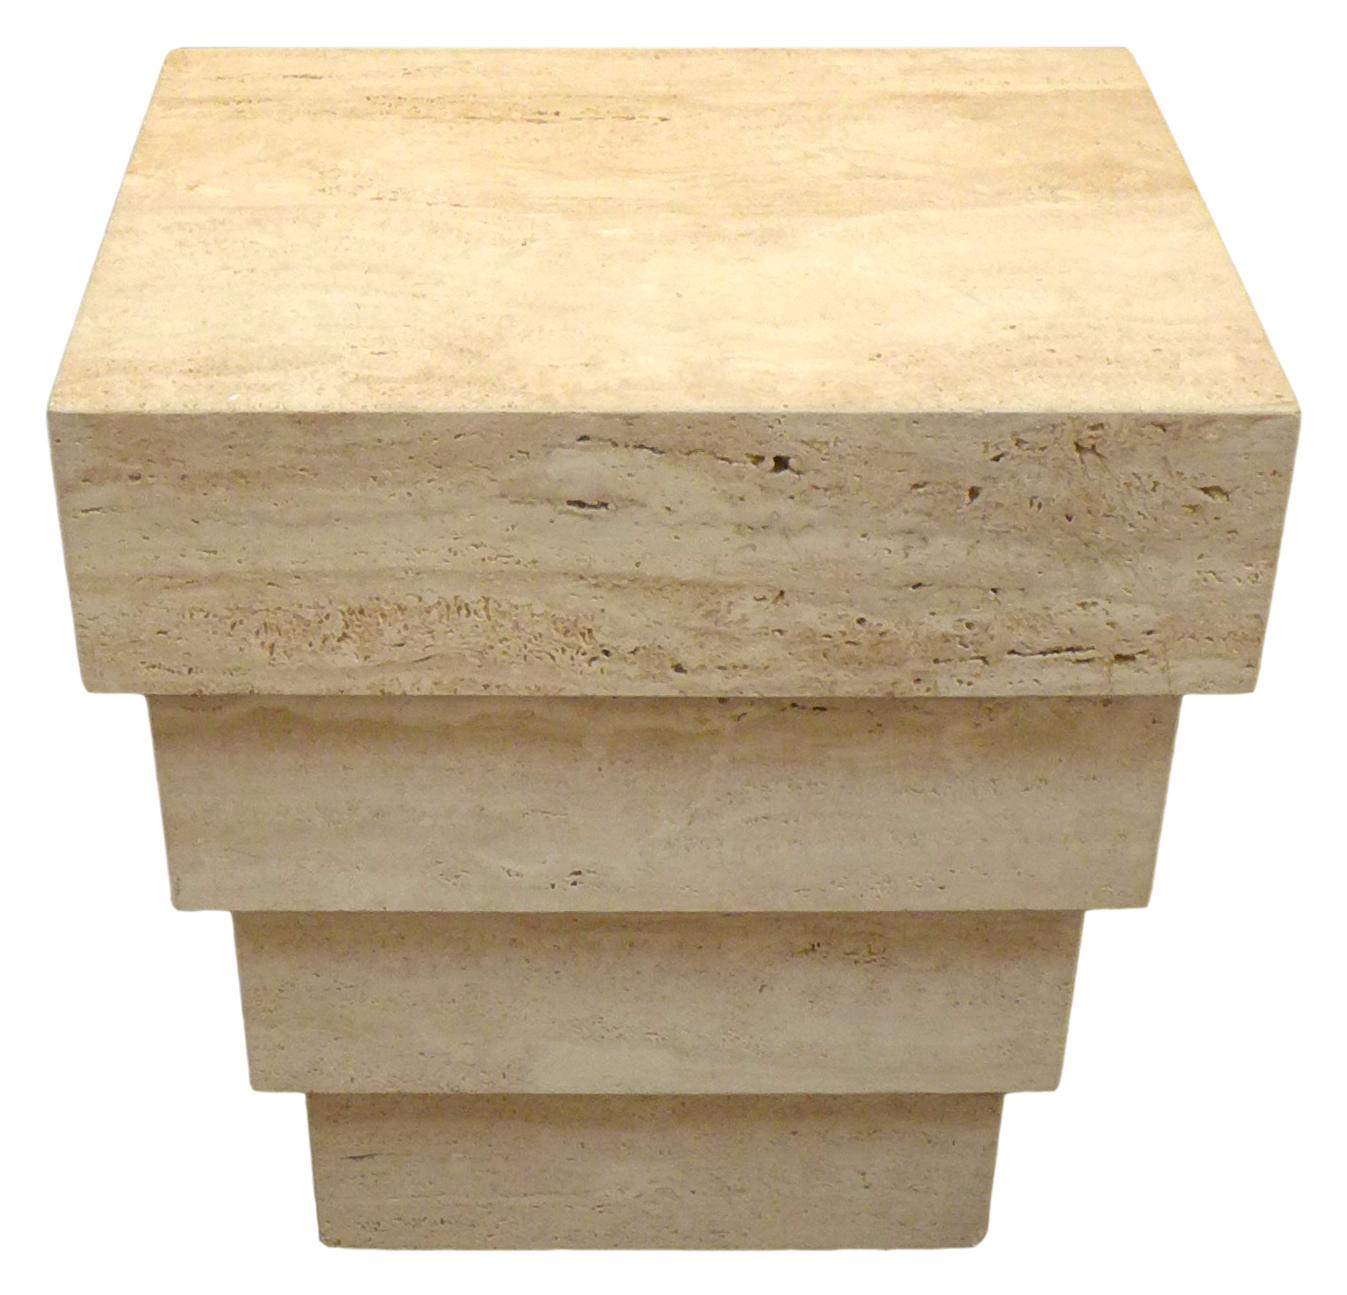 A powerful table design in travertine of stacked, stepped and graduated rectangular forms. This strong and Minimalist piece functions well as either a side table, small console, pedestal or table base. A striking and unusual decorative element.